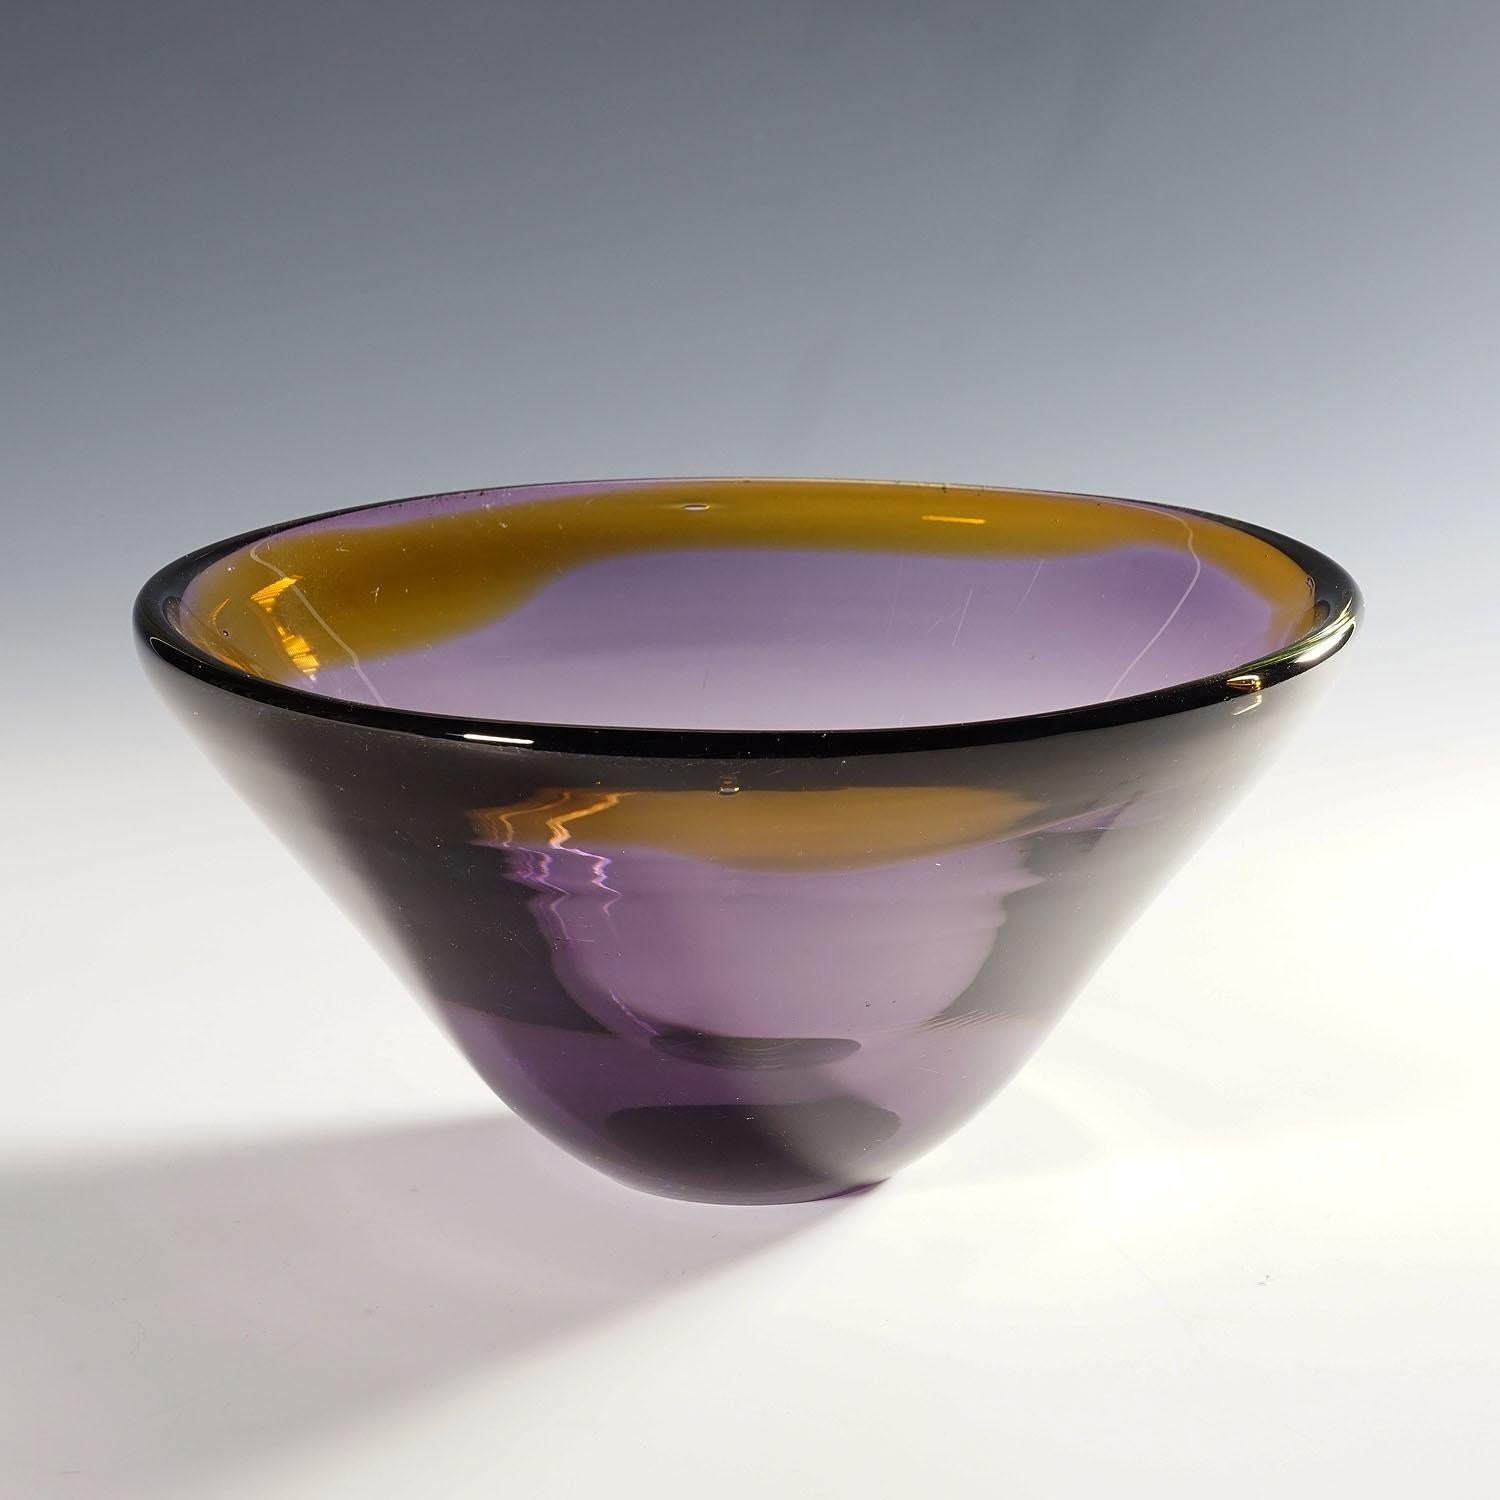 Vintage Art Glas Bowl by Willy Johannsen for Hadeland (attr.) 1957

A vintage art glass bowl most probably manufactured by Hadeland Glassworks and designed by Willy Johansson in 1957. Thick purple glass with a orange glass layer on the rim. The bowl